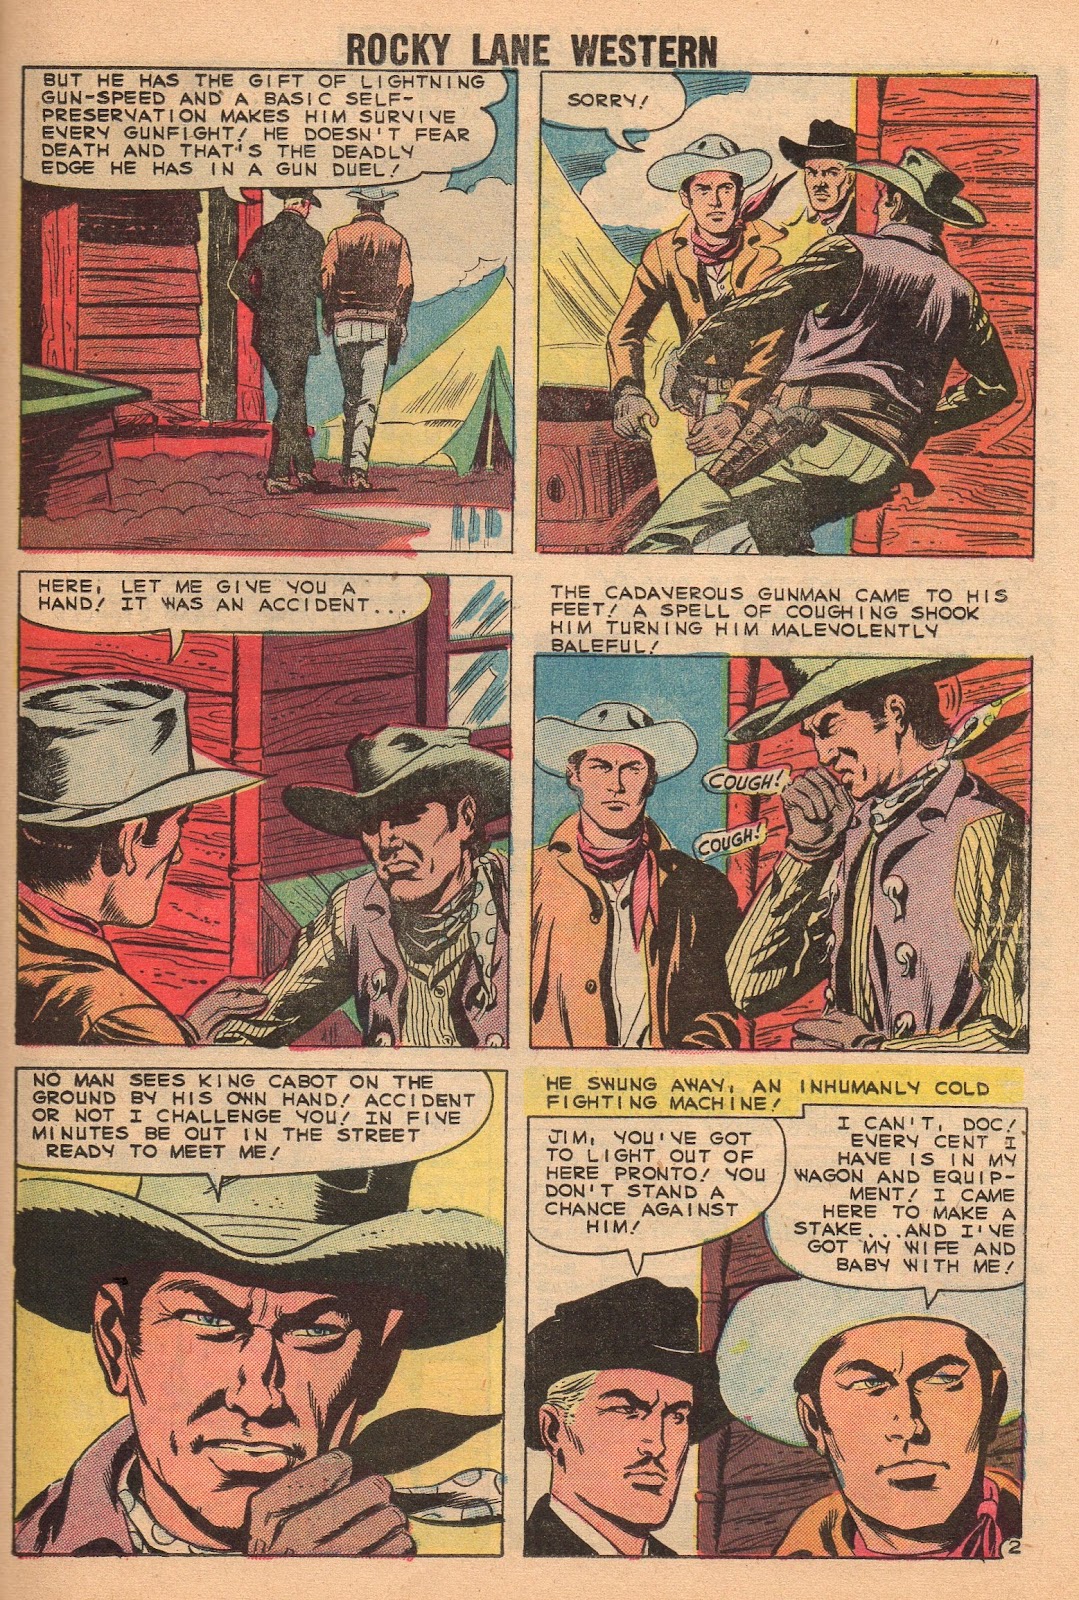 Rocky Lane Western (1954) issue 86 - Page 23